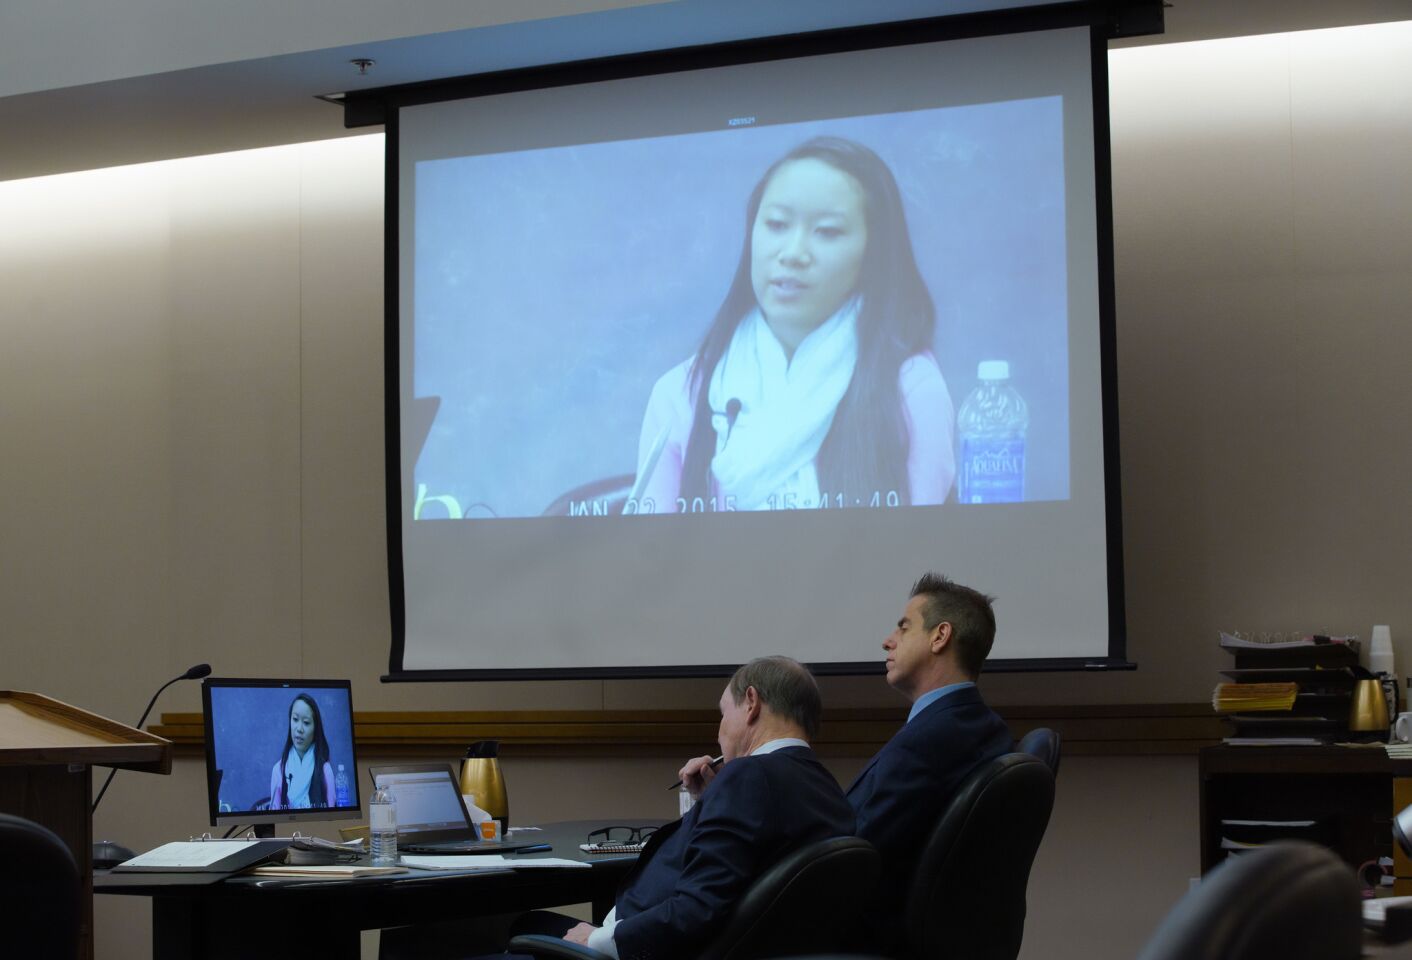 Adam Shacknai (right) sits next to his attorney, Dan Webb as a video is played of Rebecca Zahau's younger sister Xena Zahau taken during her January 22, 2015 deposition.